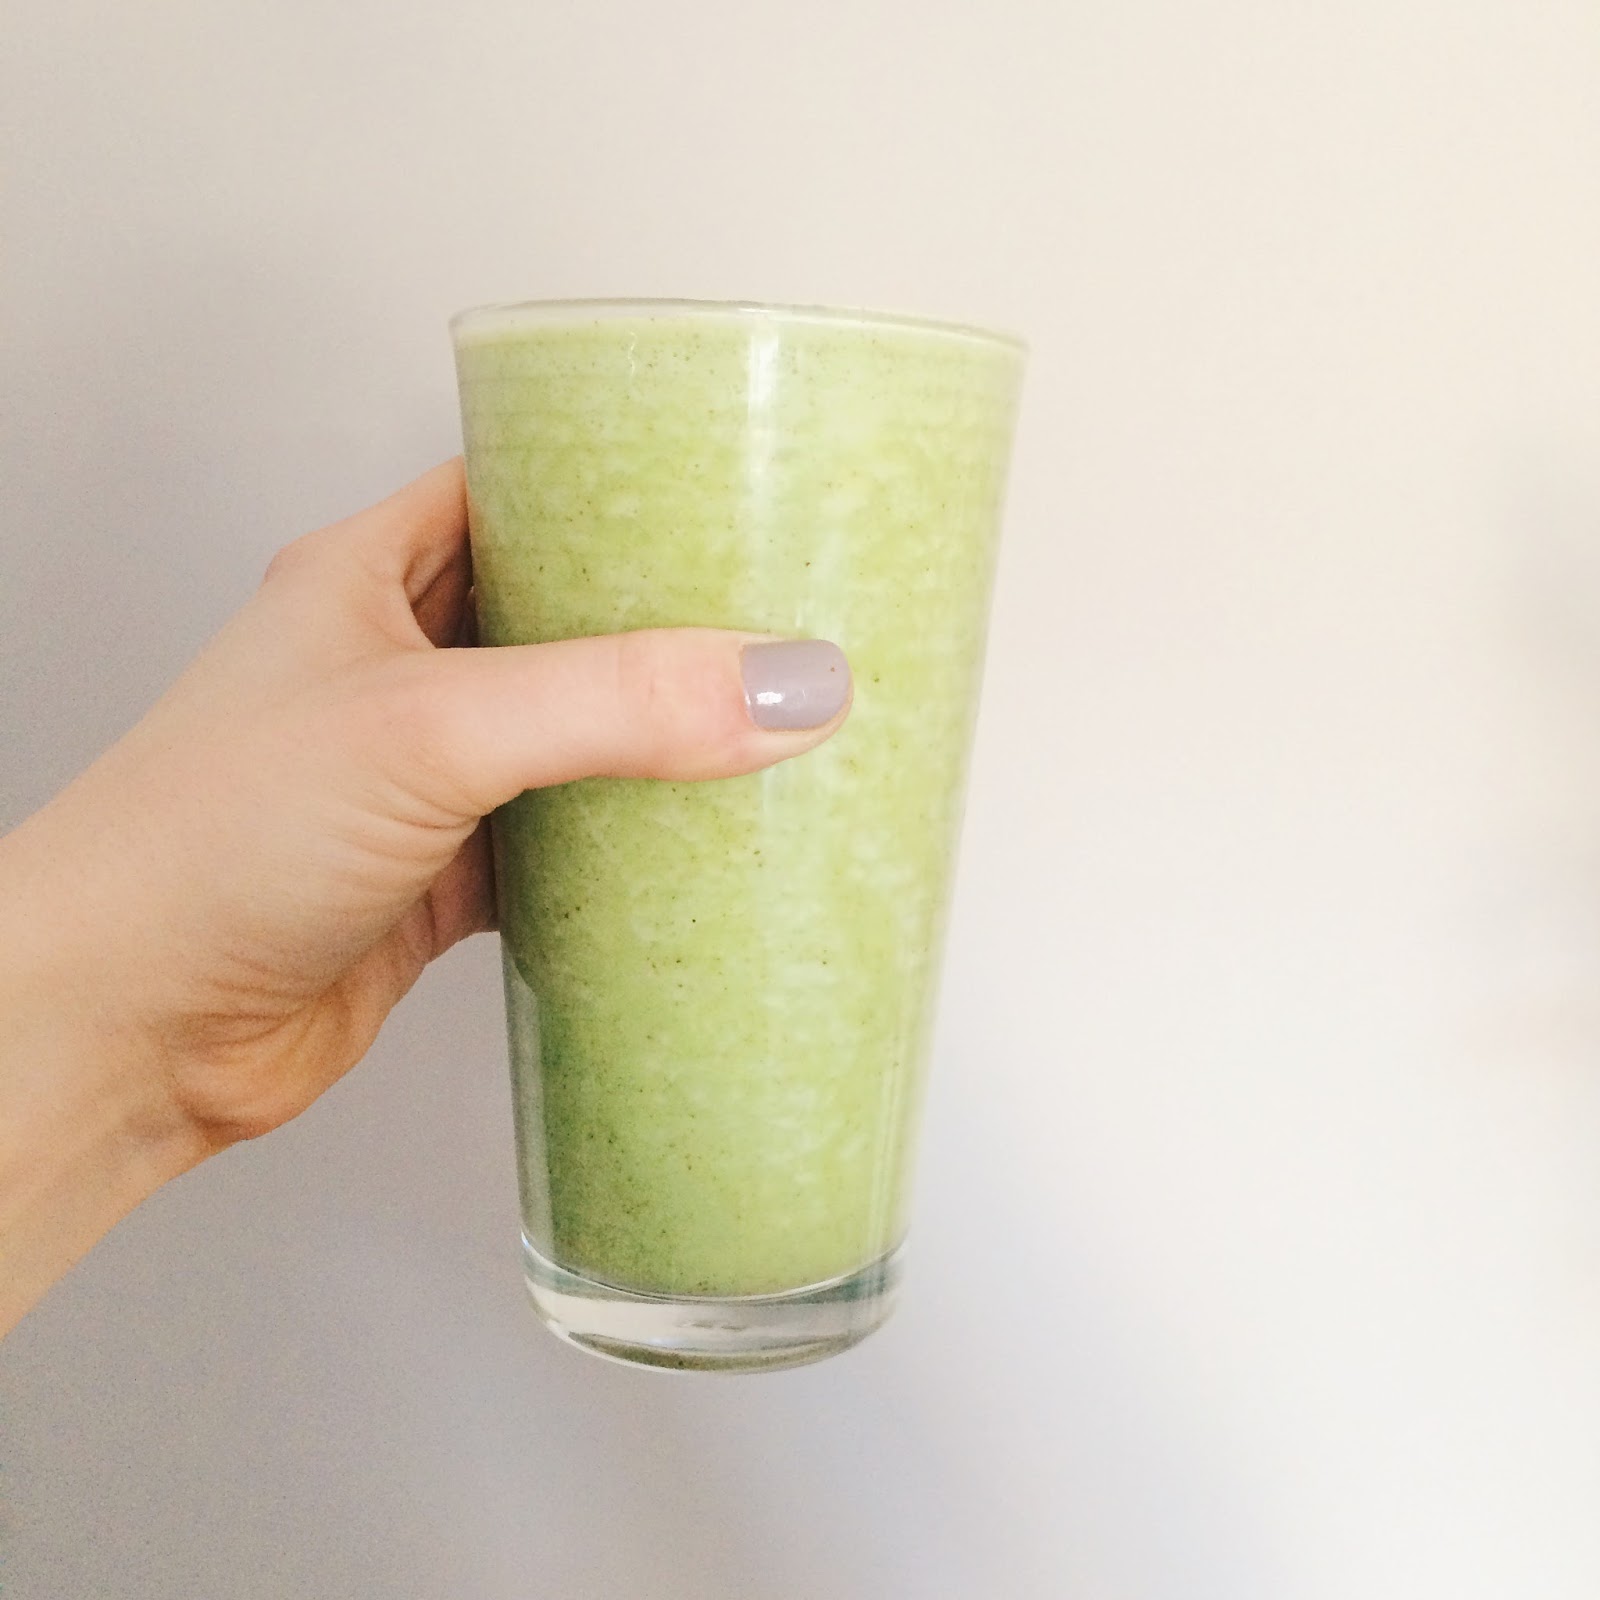 She's So Lucy Madeleine Shaw Ready Steady Glow Review Green Goddess Smoothie